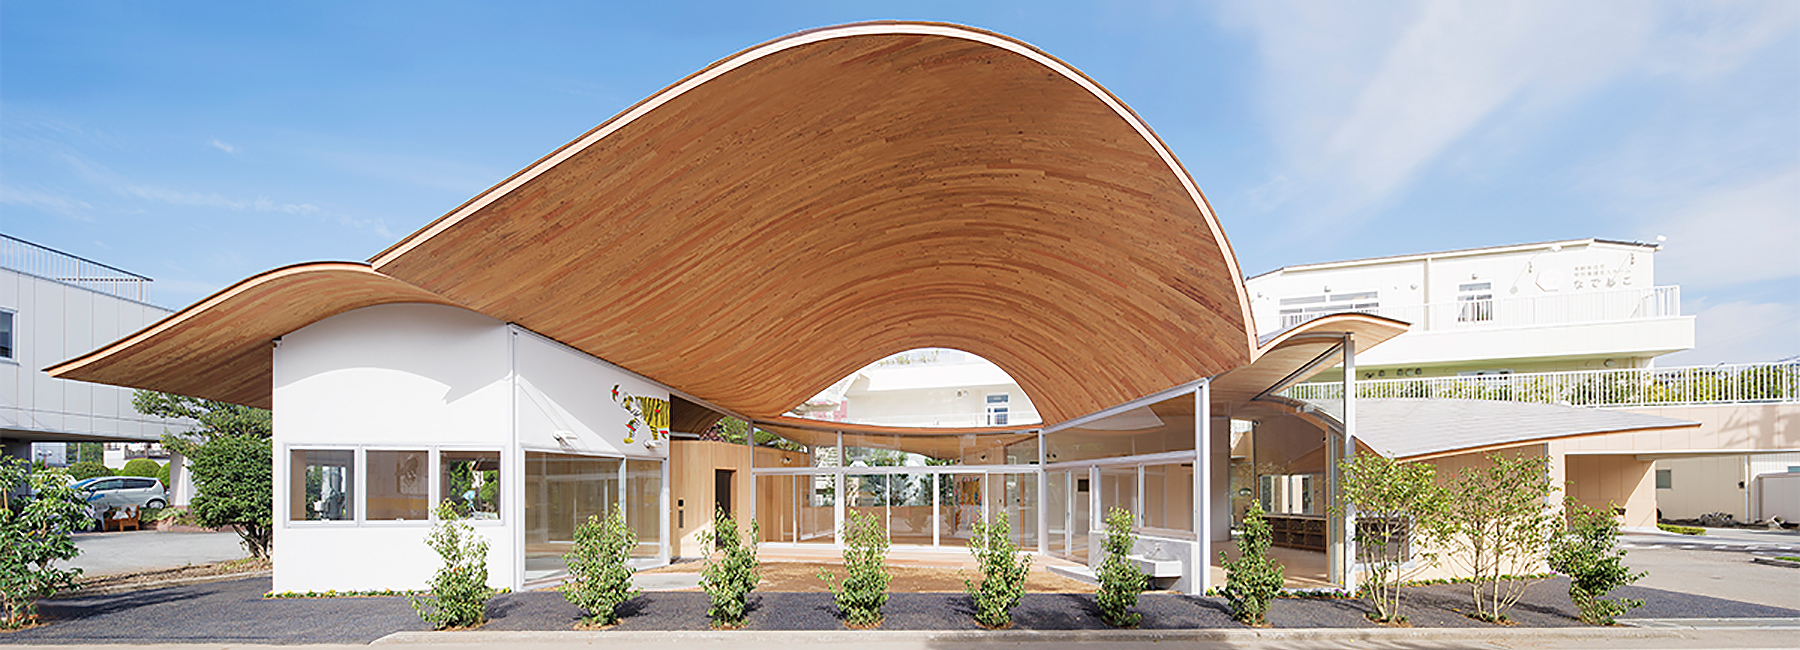 takashige yamashita tops small town nursery with a big roof in japan